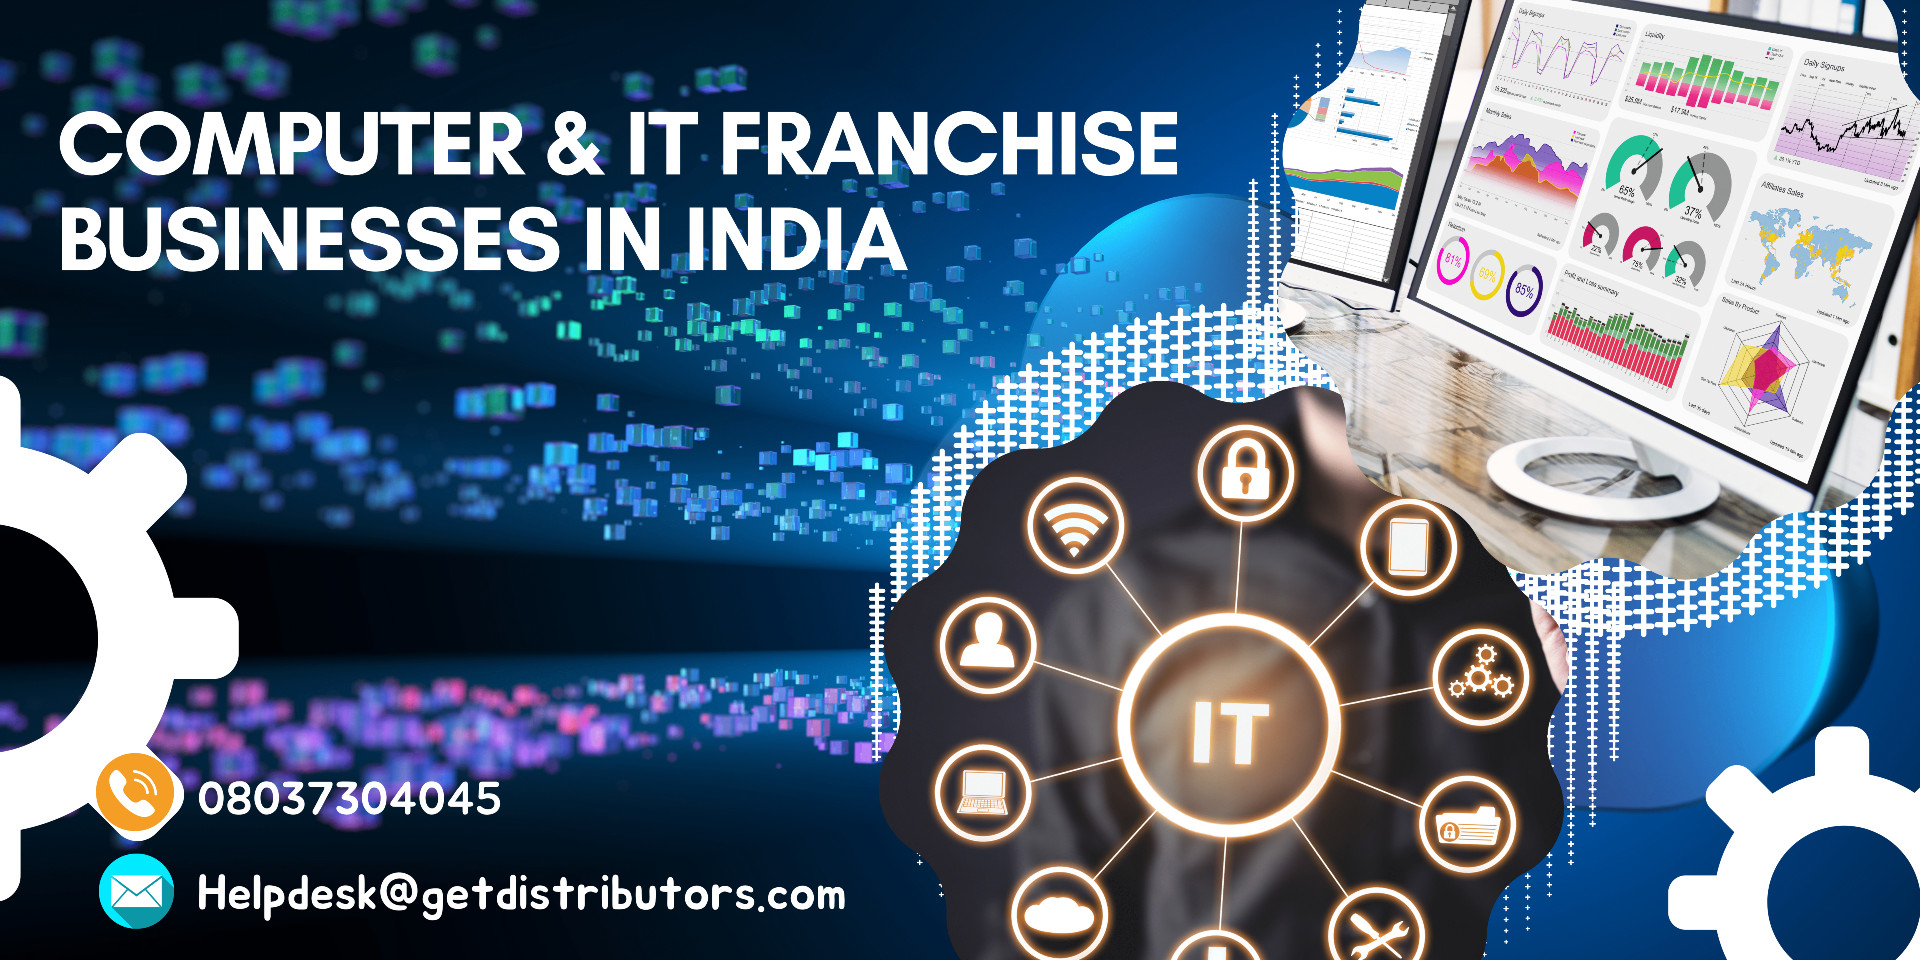 Computer & IT Franchise Businesses in India